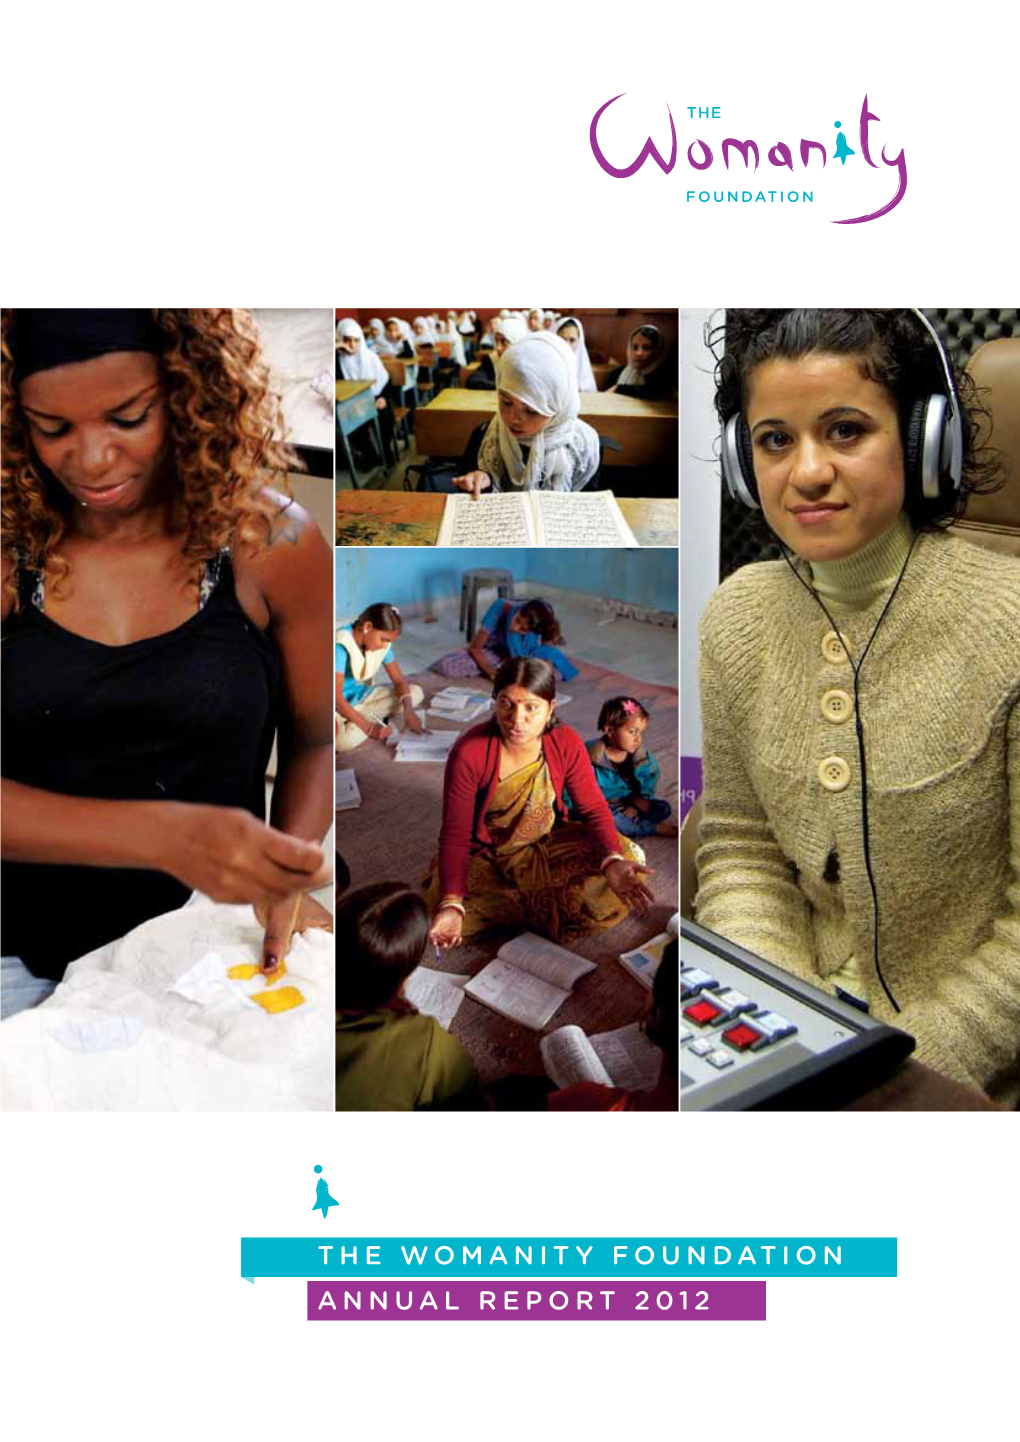 The Womanity Foundation Annual Report 2012 Photos Cover Page (From the Left)